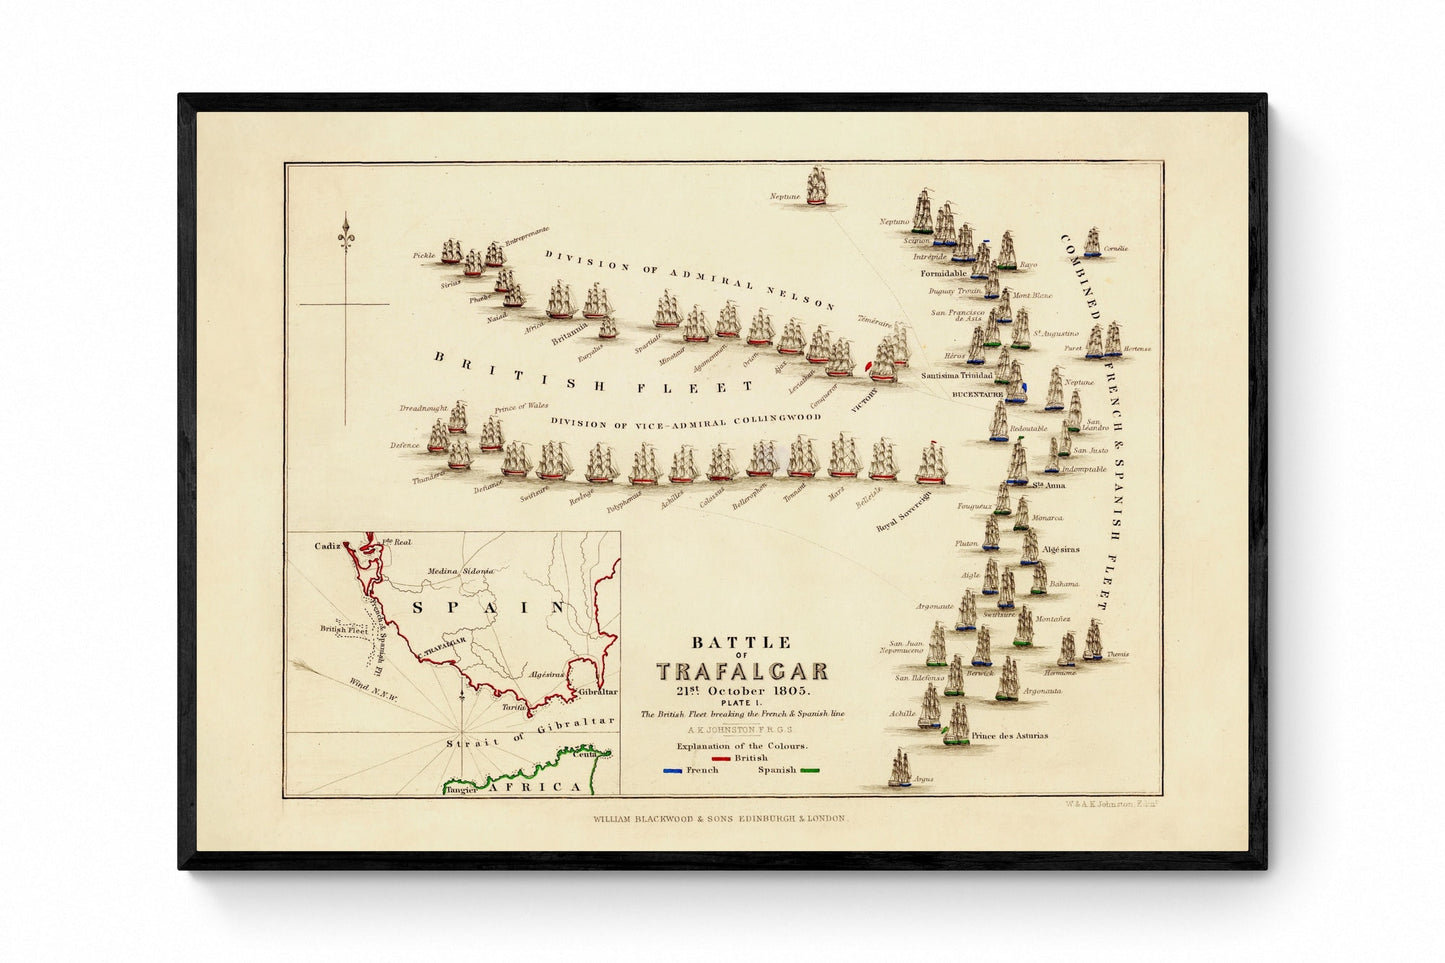 Battle of Trafalgar Map showing positions in Battle - Antique Reproduction - Naval Military History - Vintage Wall Map - Available Framed